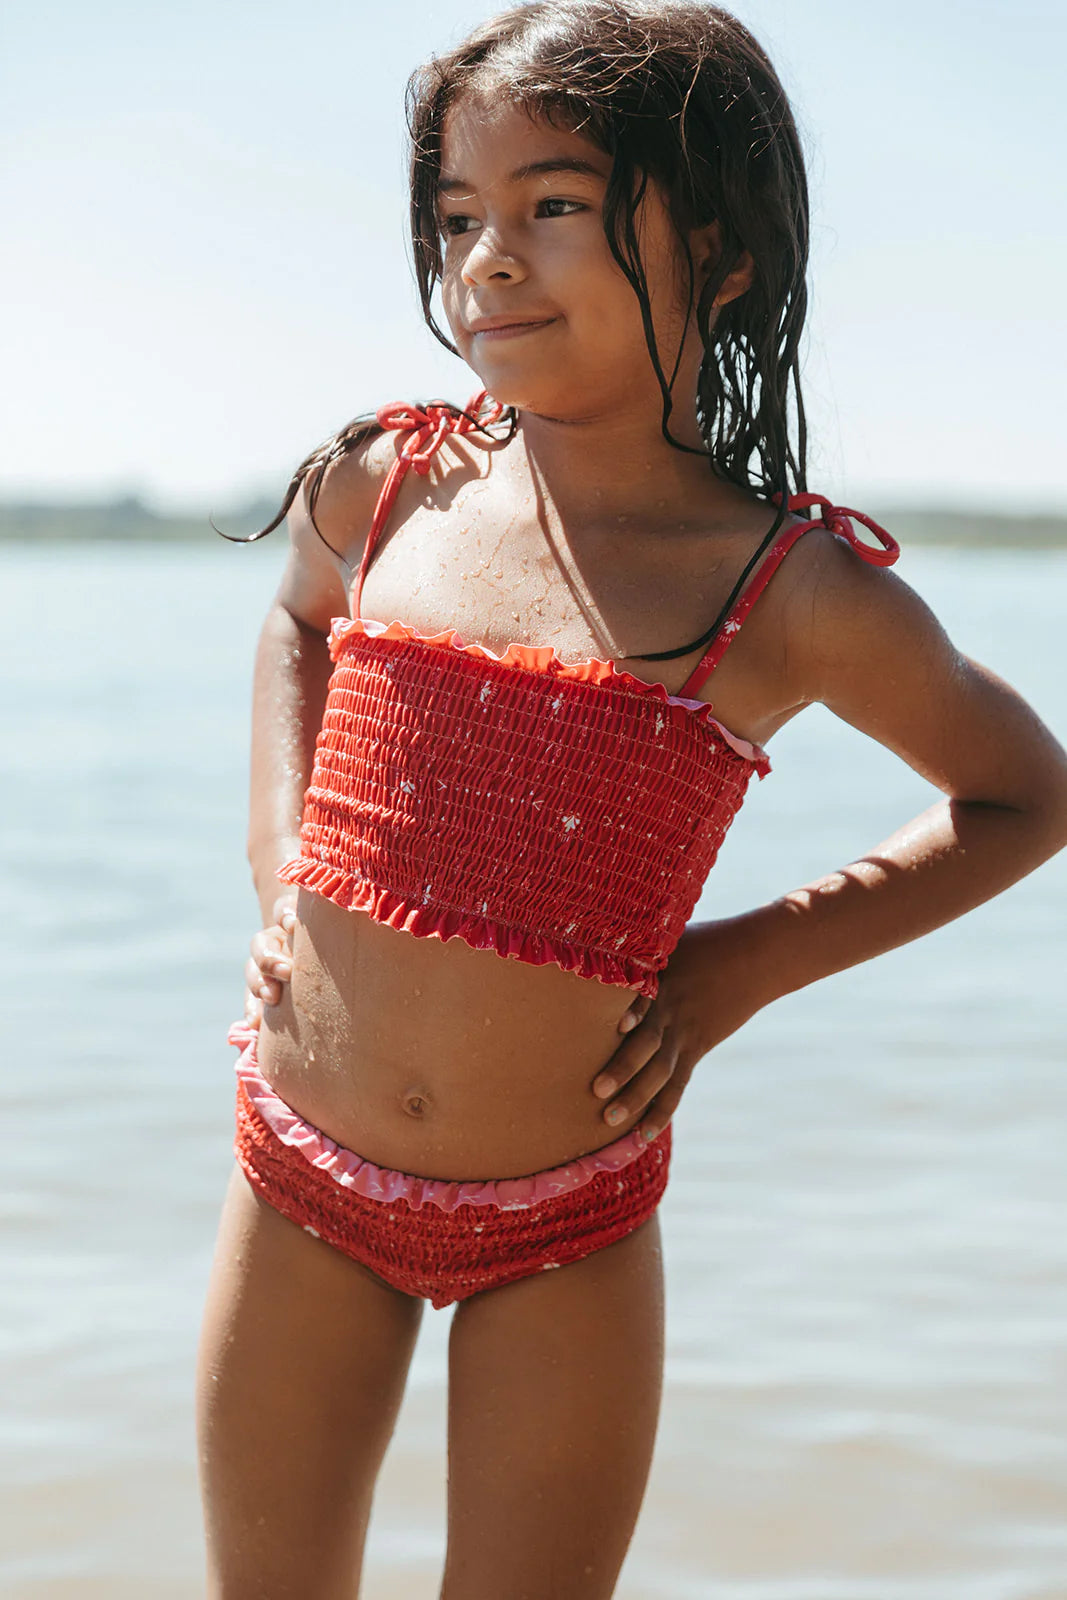 Girl in water wearing Fin and Vince Smocked Bikini - Paisley Trail Flame